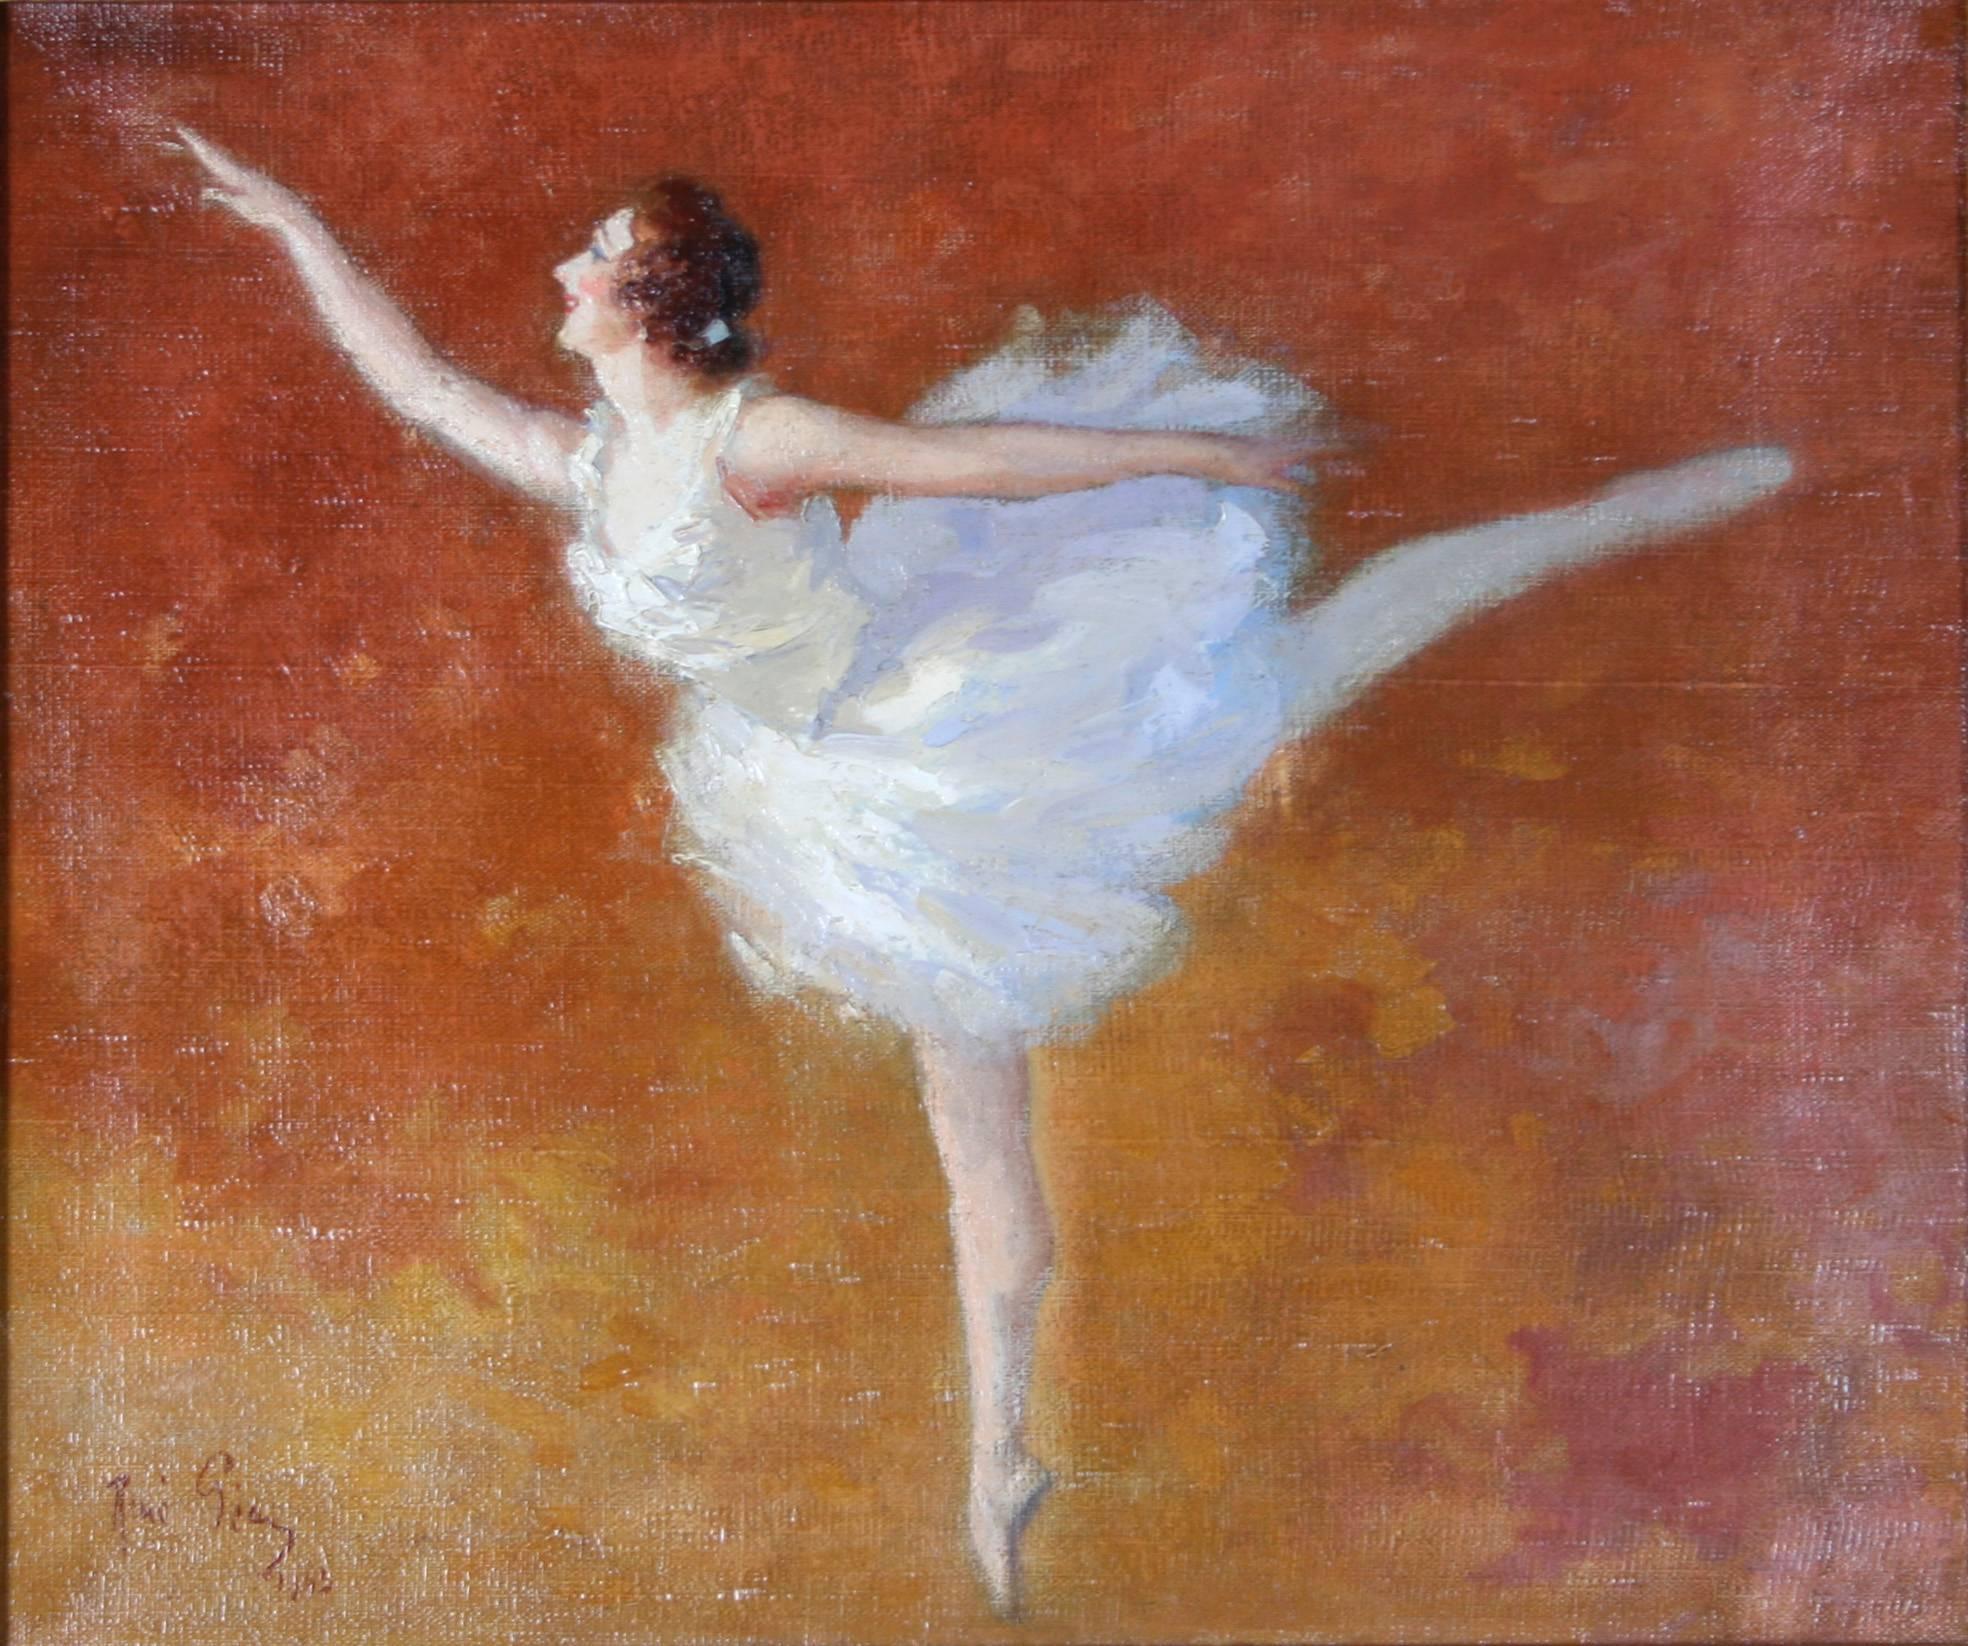 A lovely oil on canvas painting of a ballerina in the arabesque pose by Rene Pean, 1945. Signed and dated lower left.

French born Pean (1875-1956) produced many posters while working at Chaix, Jules Cheret's printing house. After world War I, he